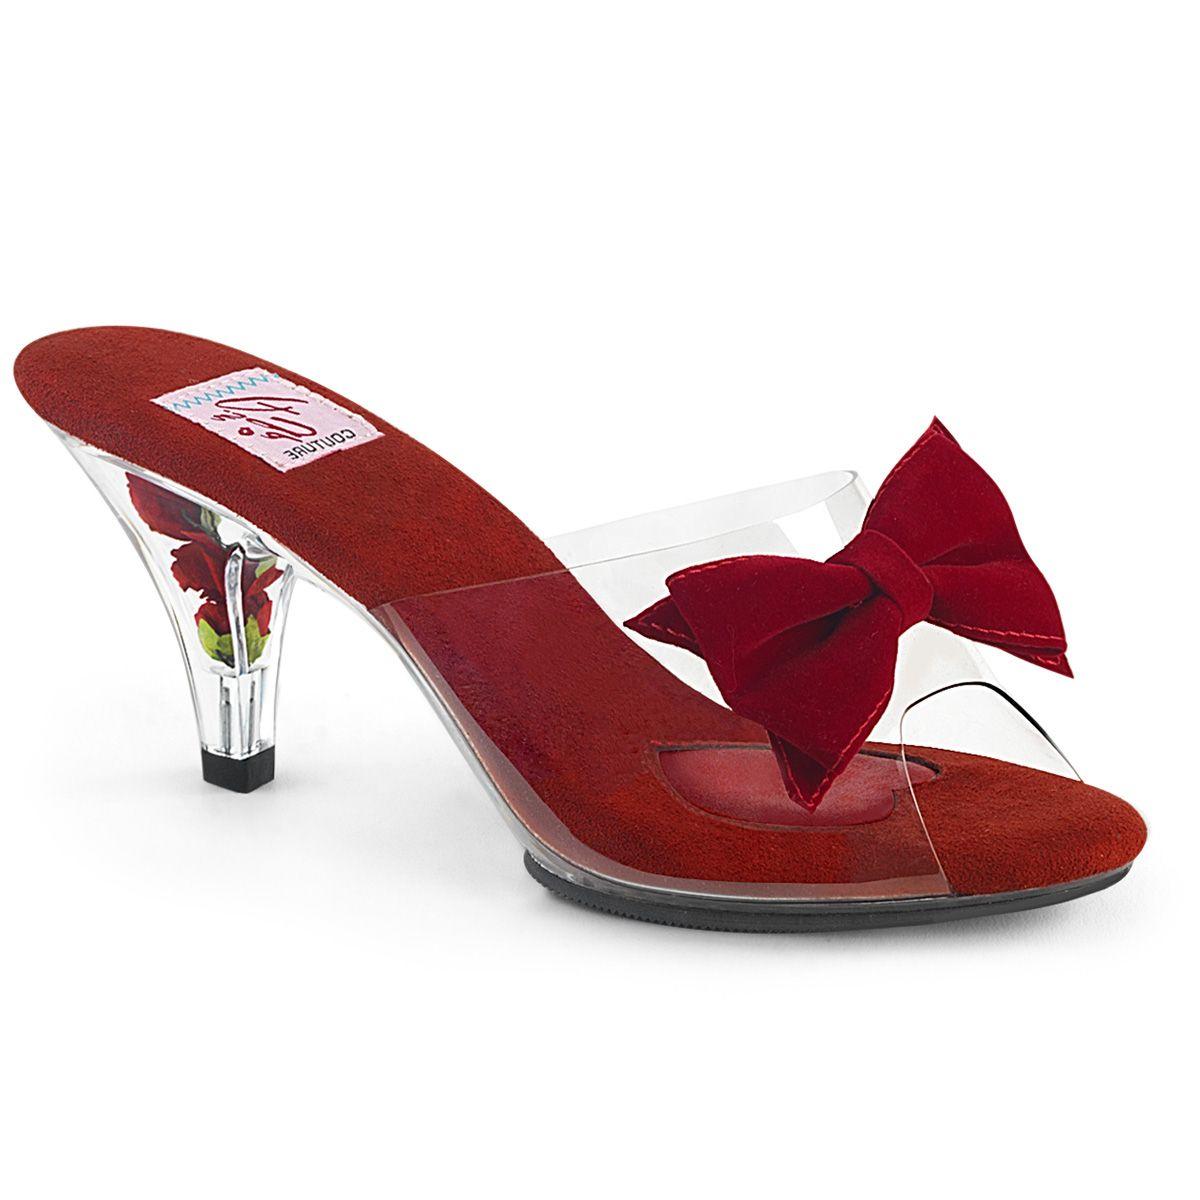 Red Open Toe Slipper with rose in the heel